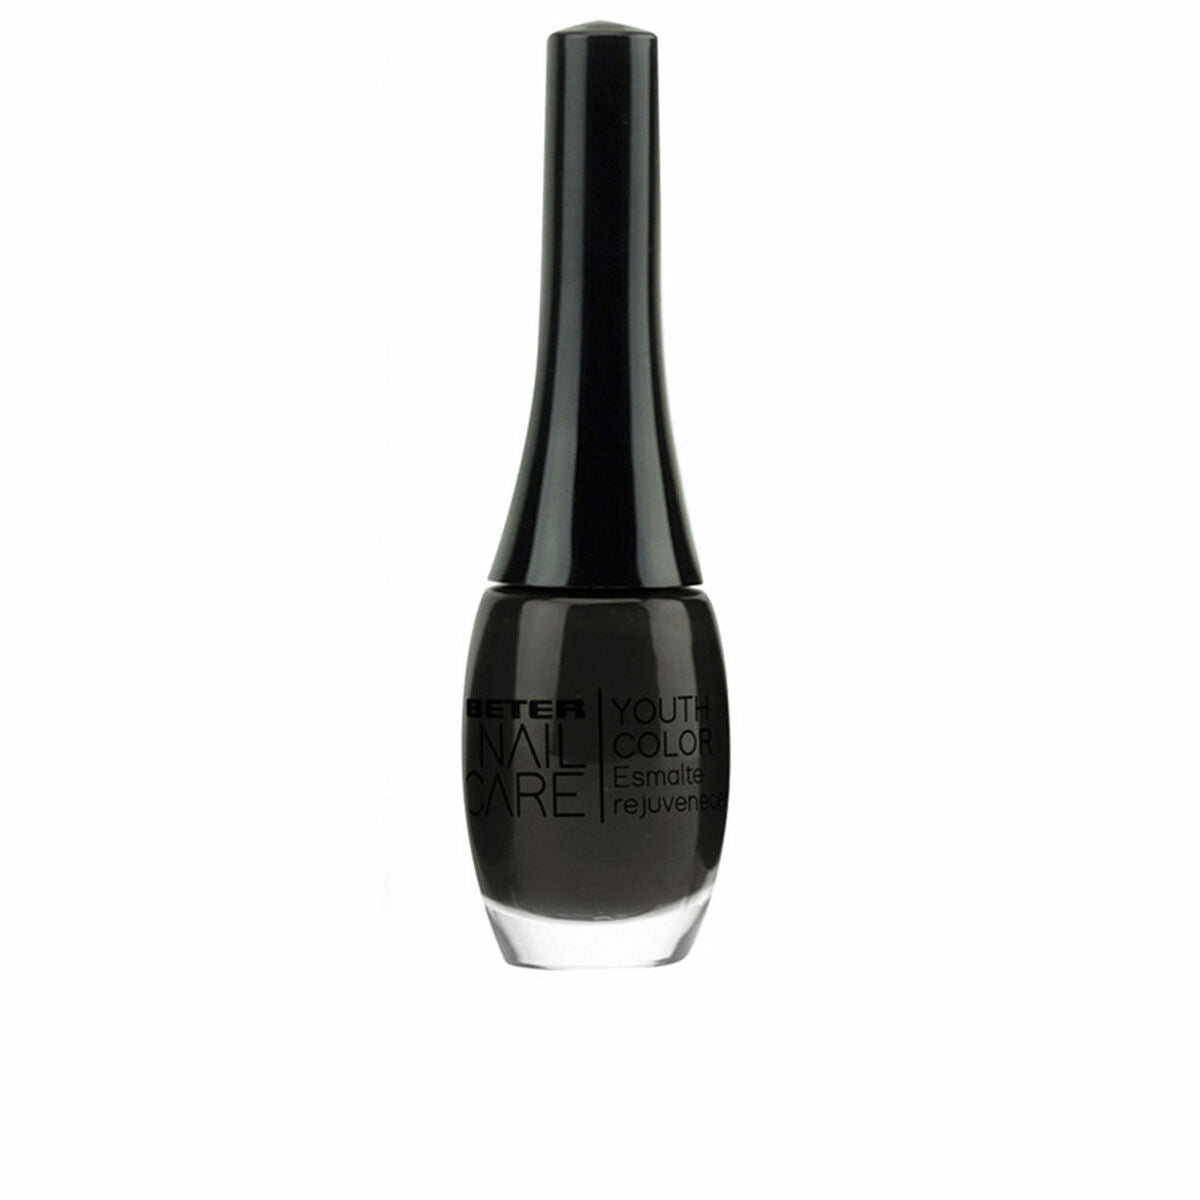 Nail polish Beter Nail Care Youth Color Nº 037 Midnight Black 11 ml - Calm Beauty IE